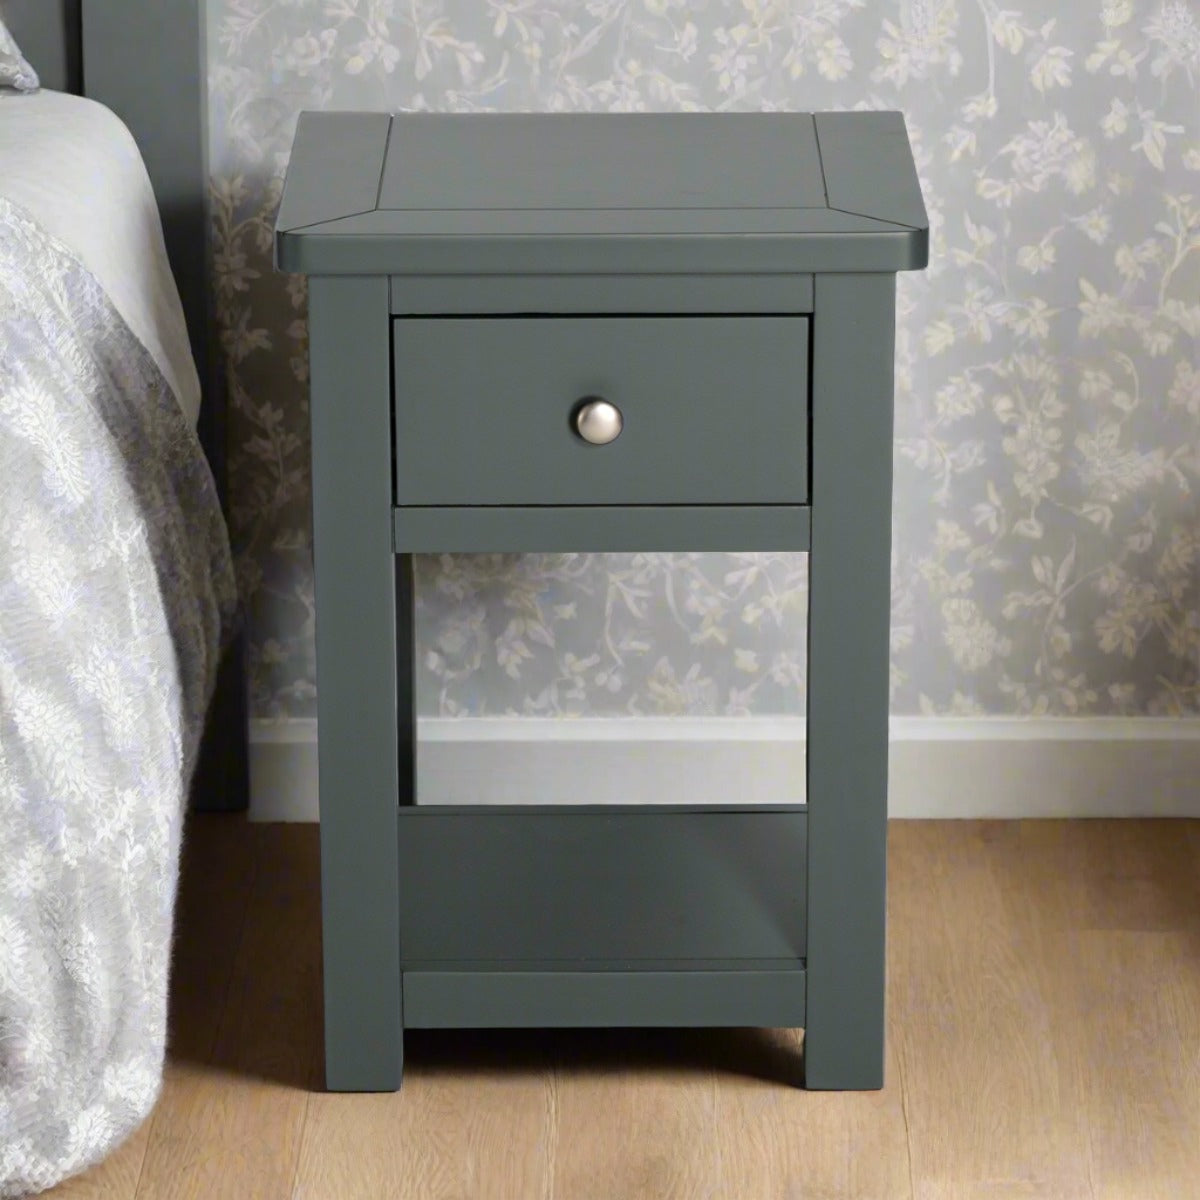 CH-6001-black-dark-charcoal-bedside-table-cabinet-solid-wood-fully-assembled-1drw-simply-bedsides-10